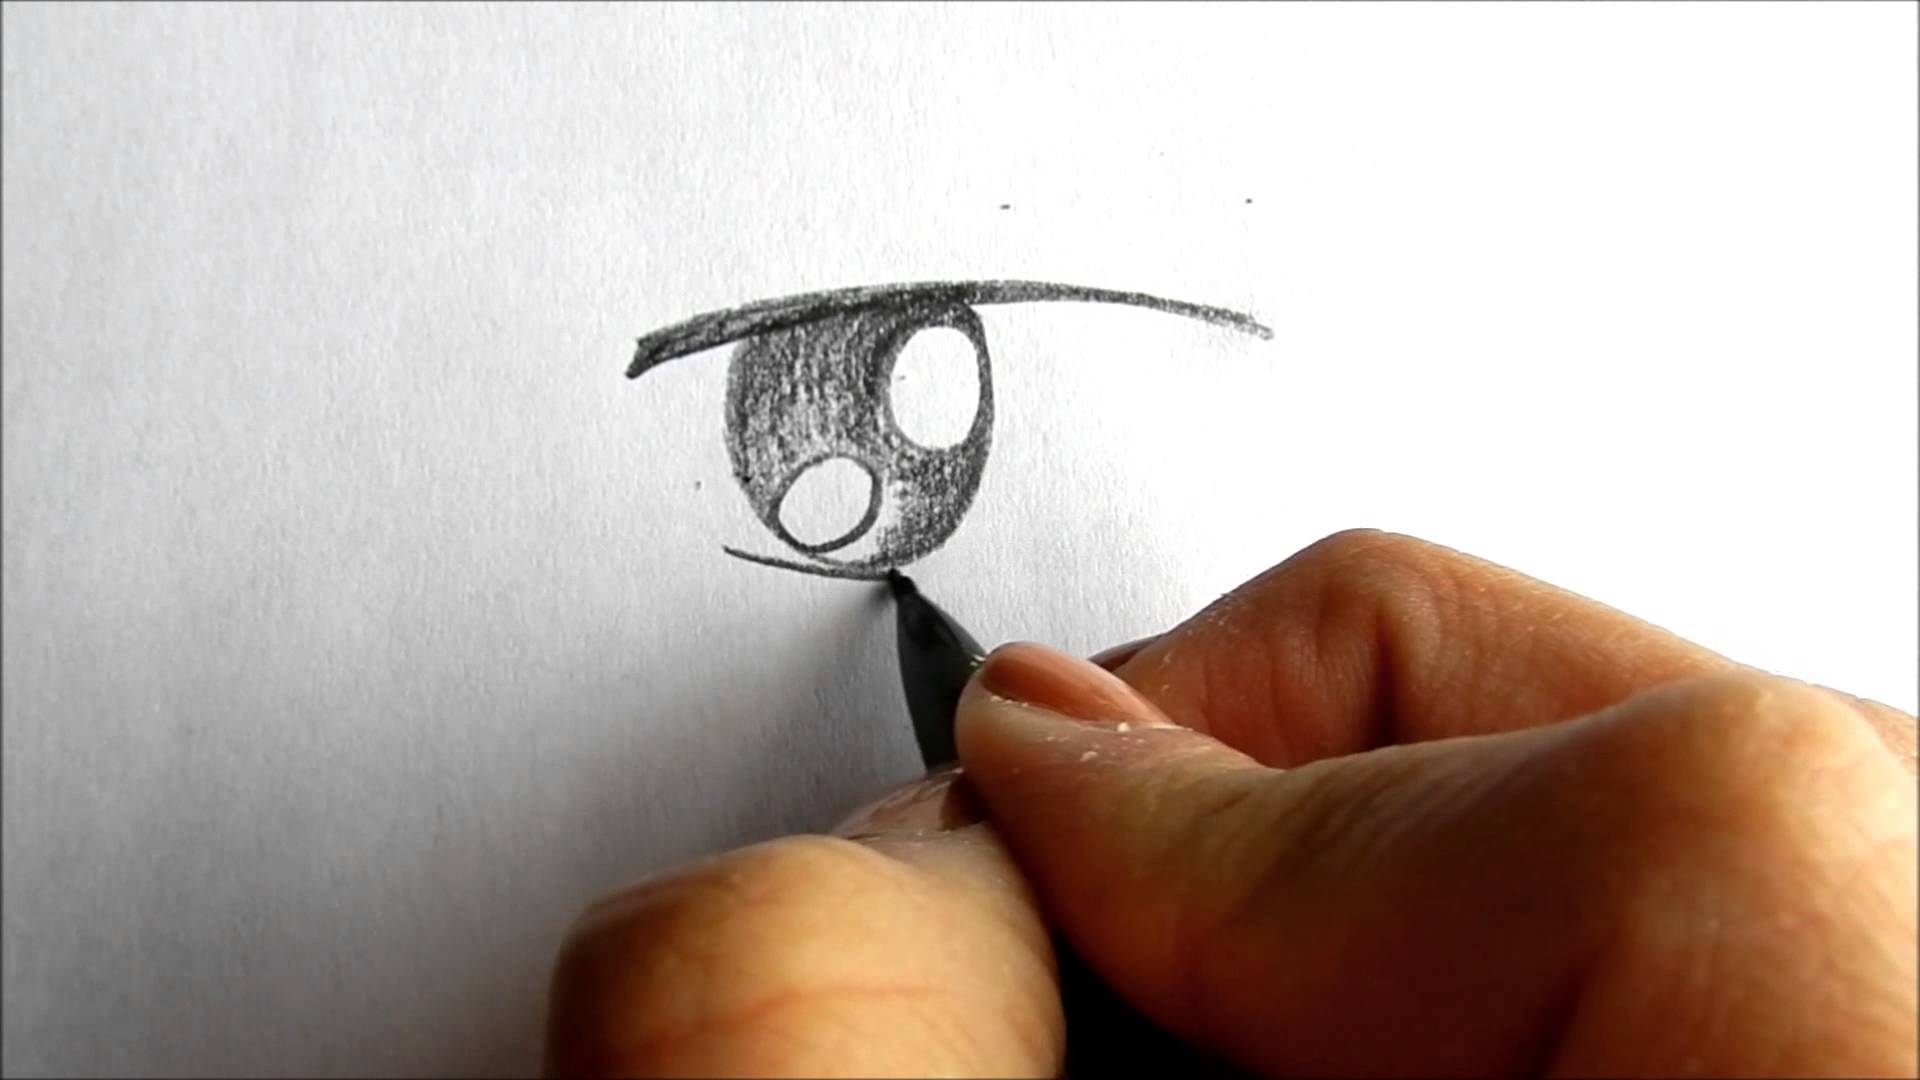 How To Draw A Eye Easy / DOs & DON'Ts: How to Draw Realistic Eyes Easy